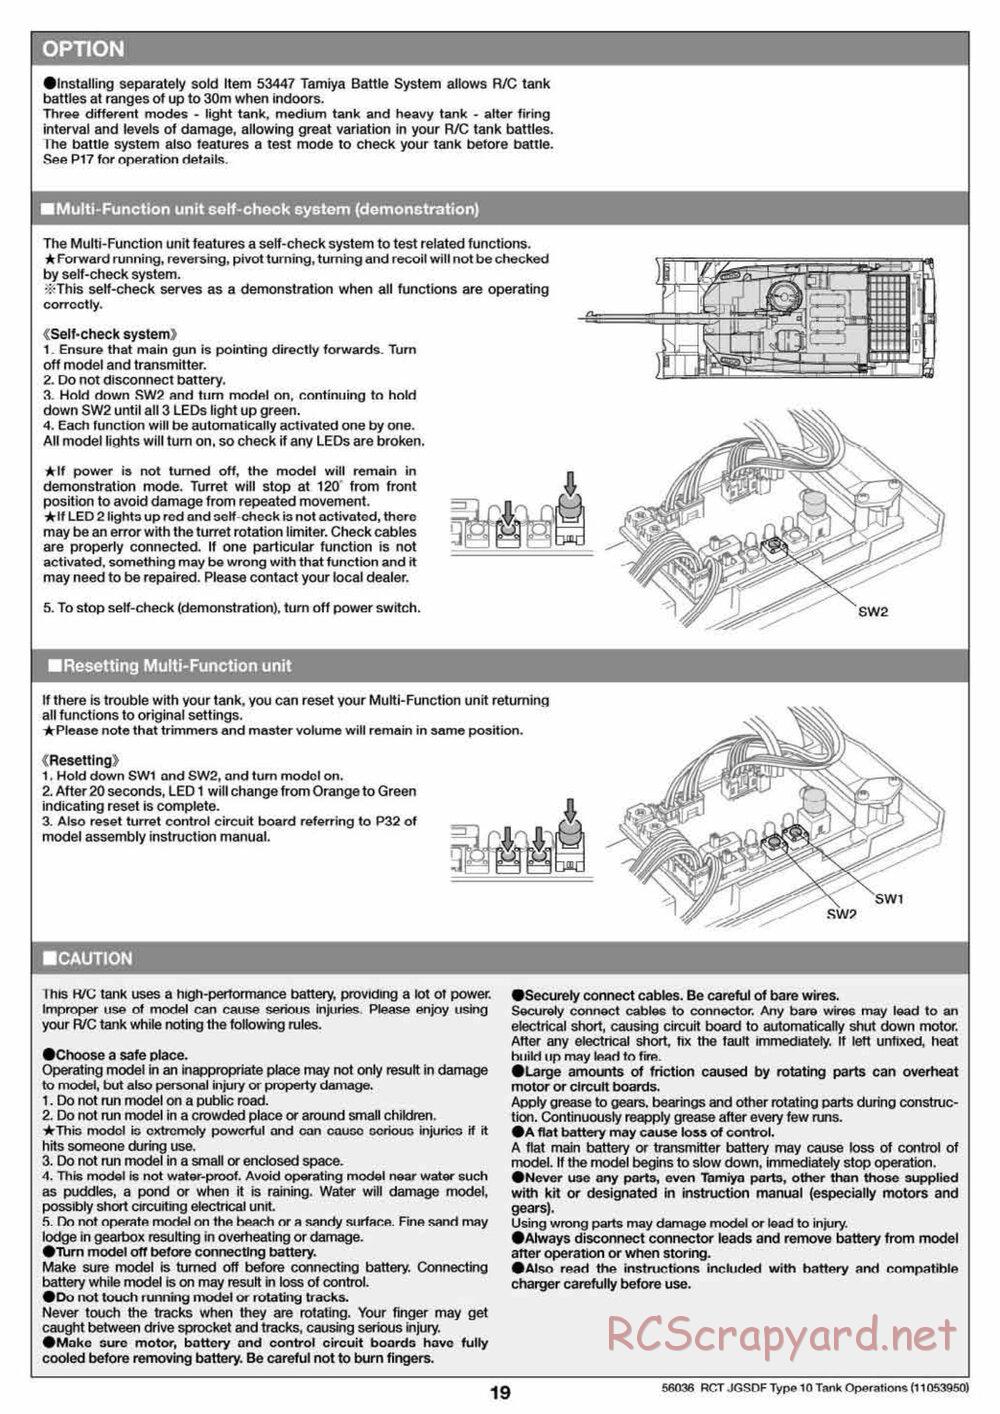 Tamiya - JGSDF Type 10 Tank - 1/16 Scale Chassis - Operation Manual - Page 9